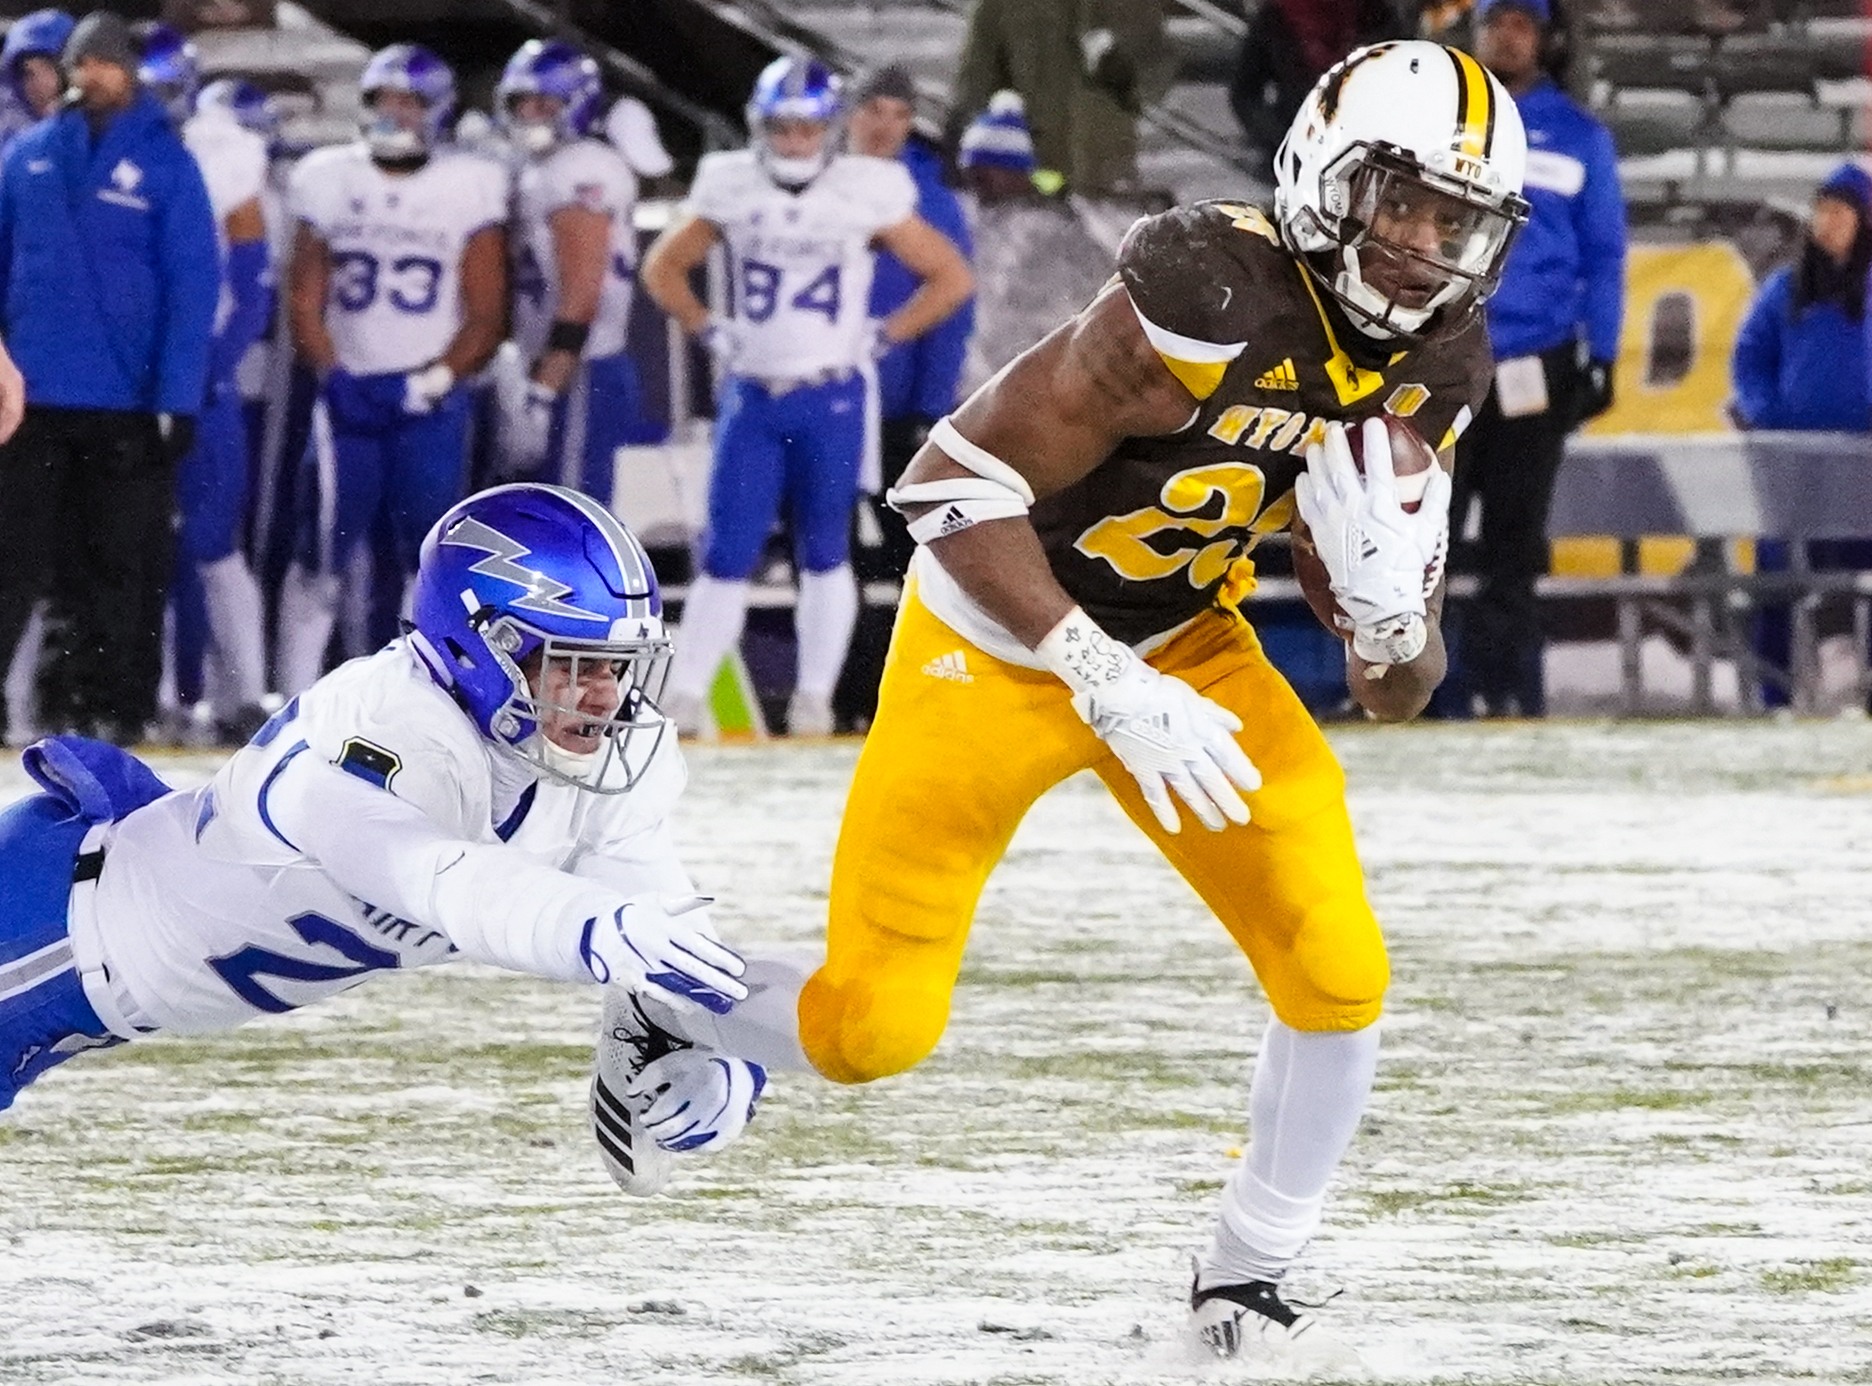 You've probably never heard of Wyoming running back Xazavian Valladay -- or could spell his name -- but he could be the key to big wins in DFS on the Dec. 31 college bowl game slate. (Image: Go Wyoming)